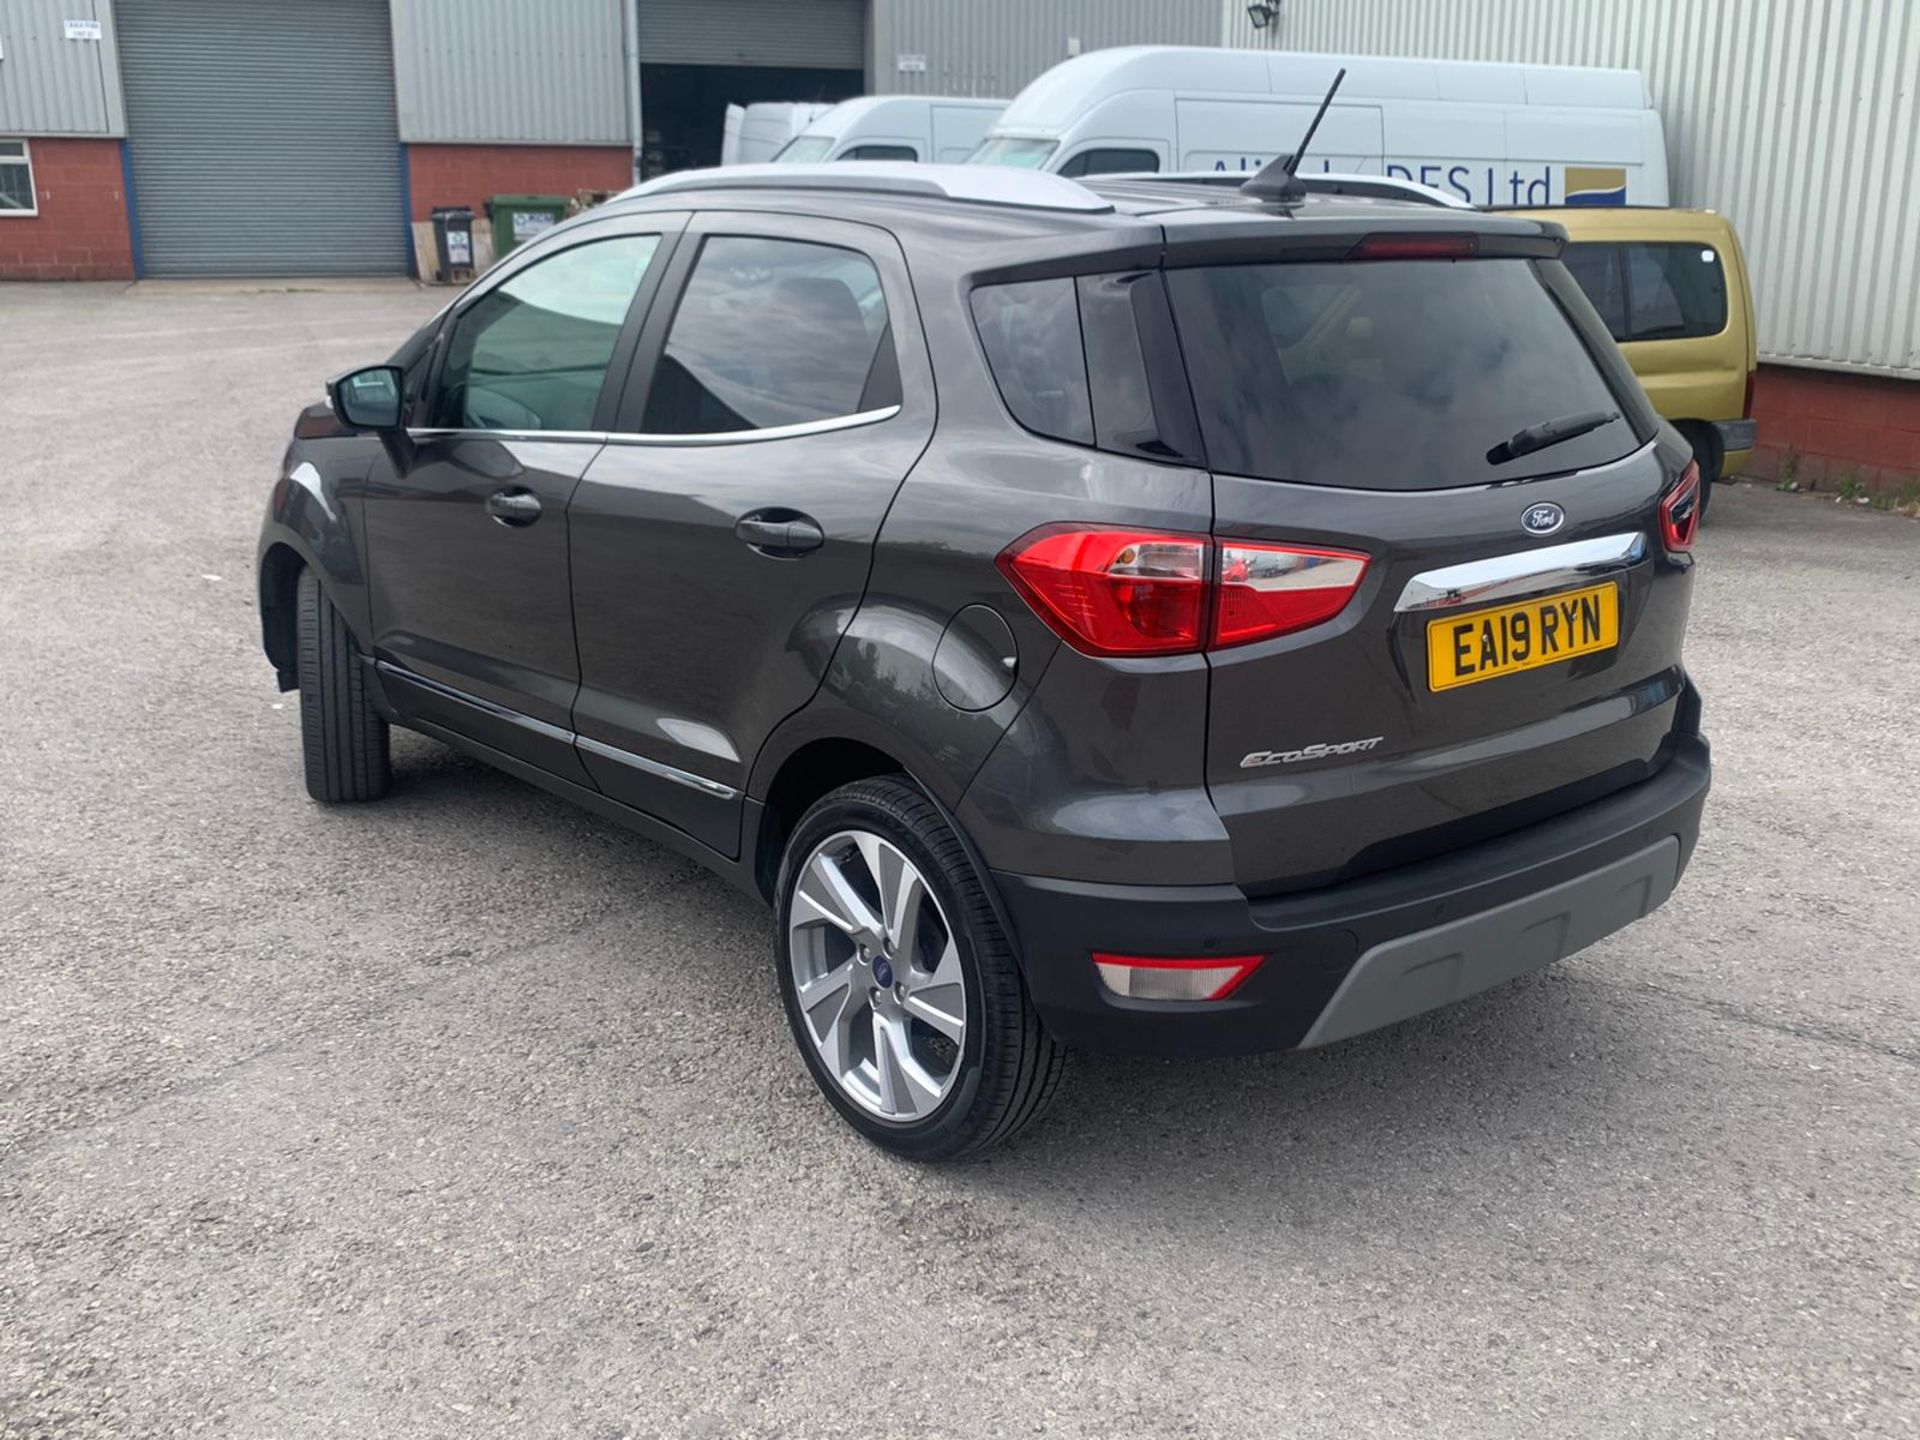 2019/19 REG FORD ECOSPORT TITANIUM 998CC PETROL 125BHP 5DR, SHOWING 0 FORMER KEEPERS *NO VAT* - Image 8 of 14